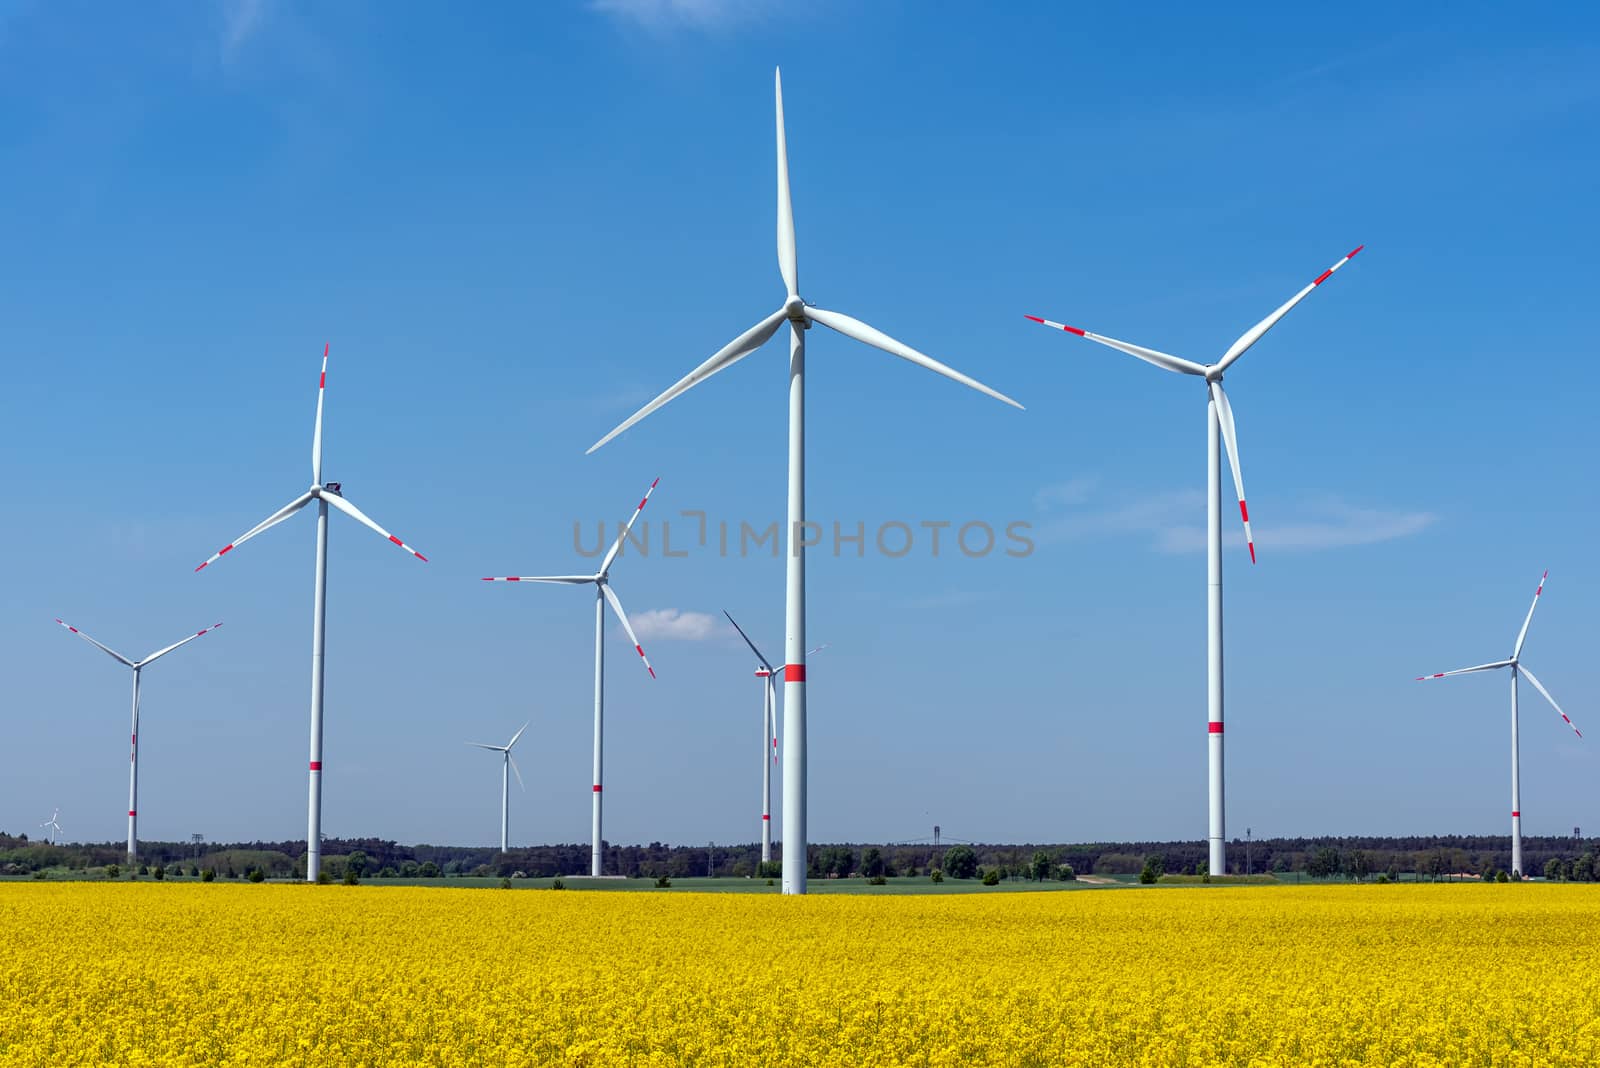 Wind wheels and a flowering canola field seen in Germany